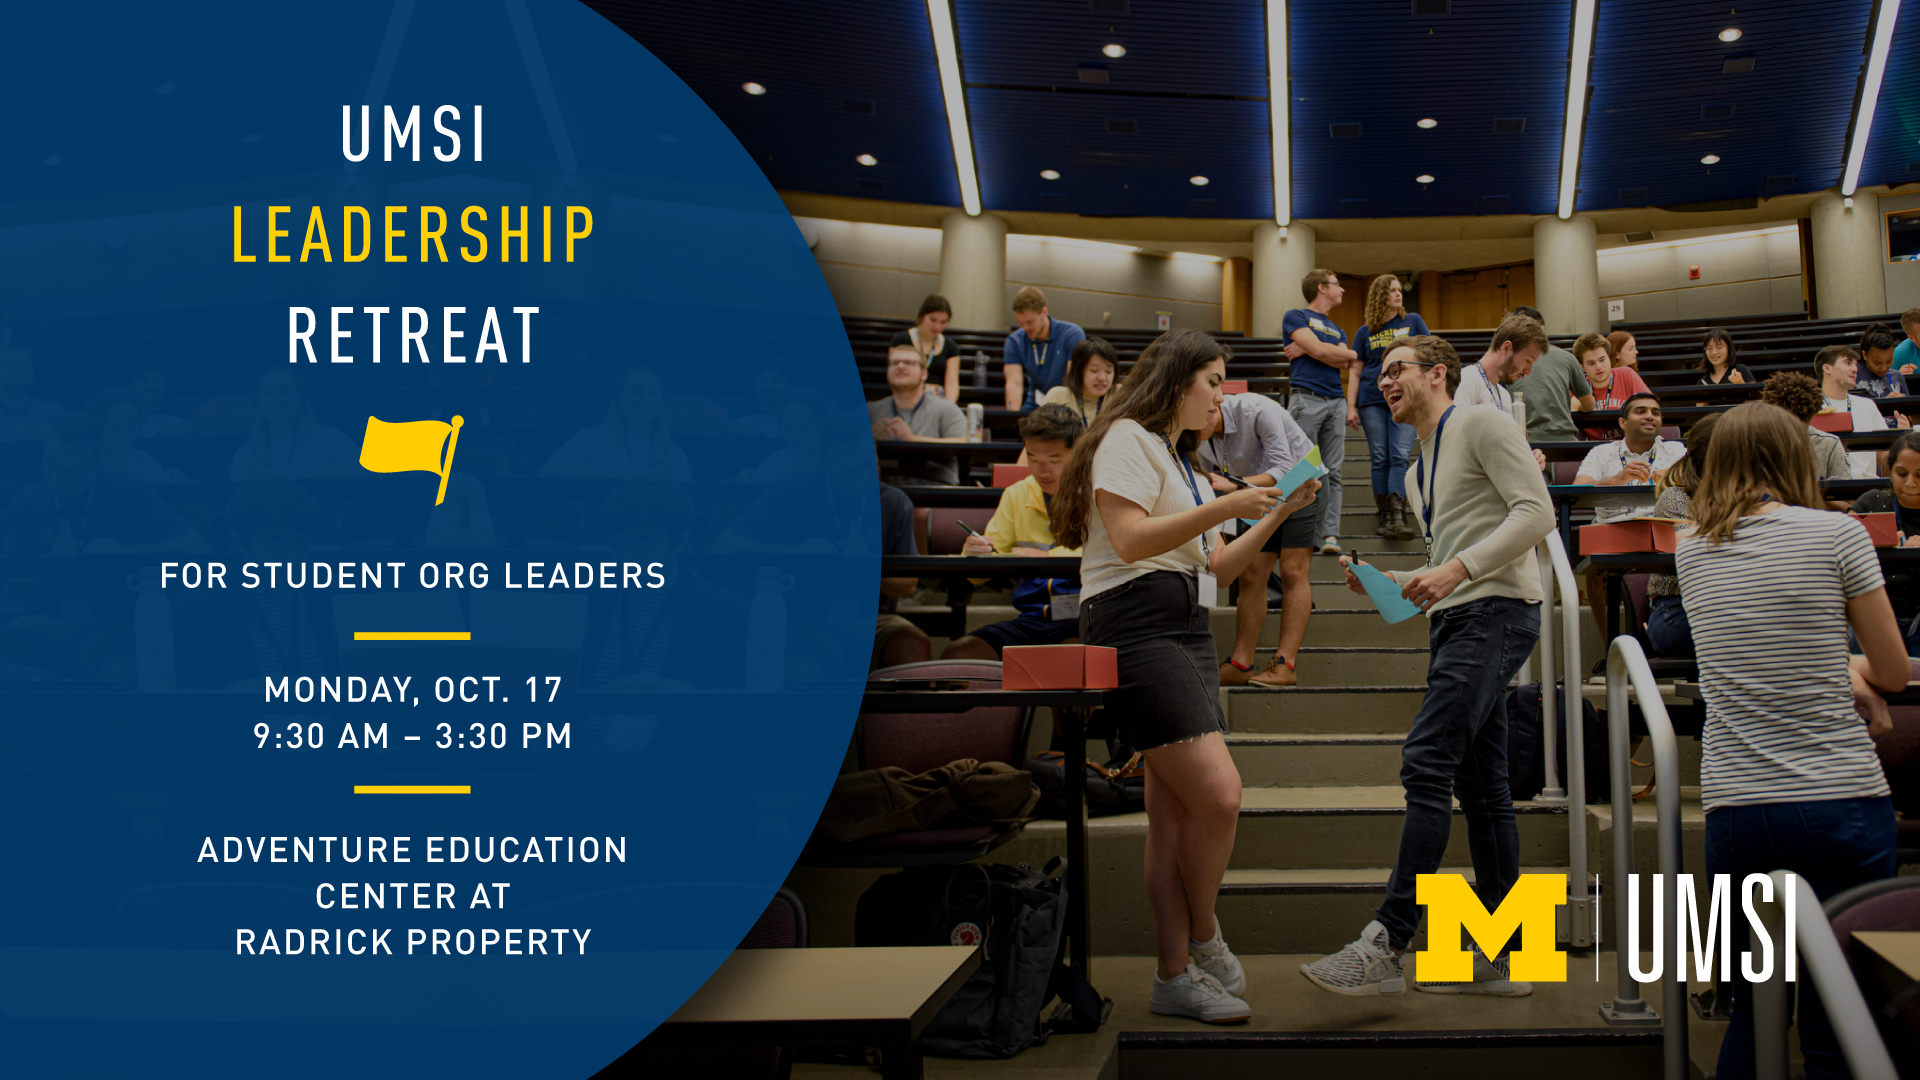 “UMSI Leadership Retreat for student org leaders. Monday, Oct. 17. 9:30 am - 3:30 pm. Adventure Education Center at Roderick Property.” A group of about 35 people wearing lanyards inside an auditorium. Some sit at desks working, some stand and interact with each other.